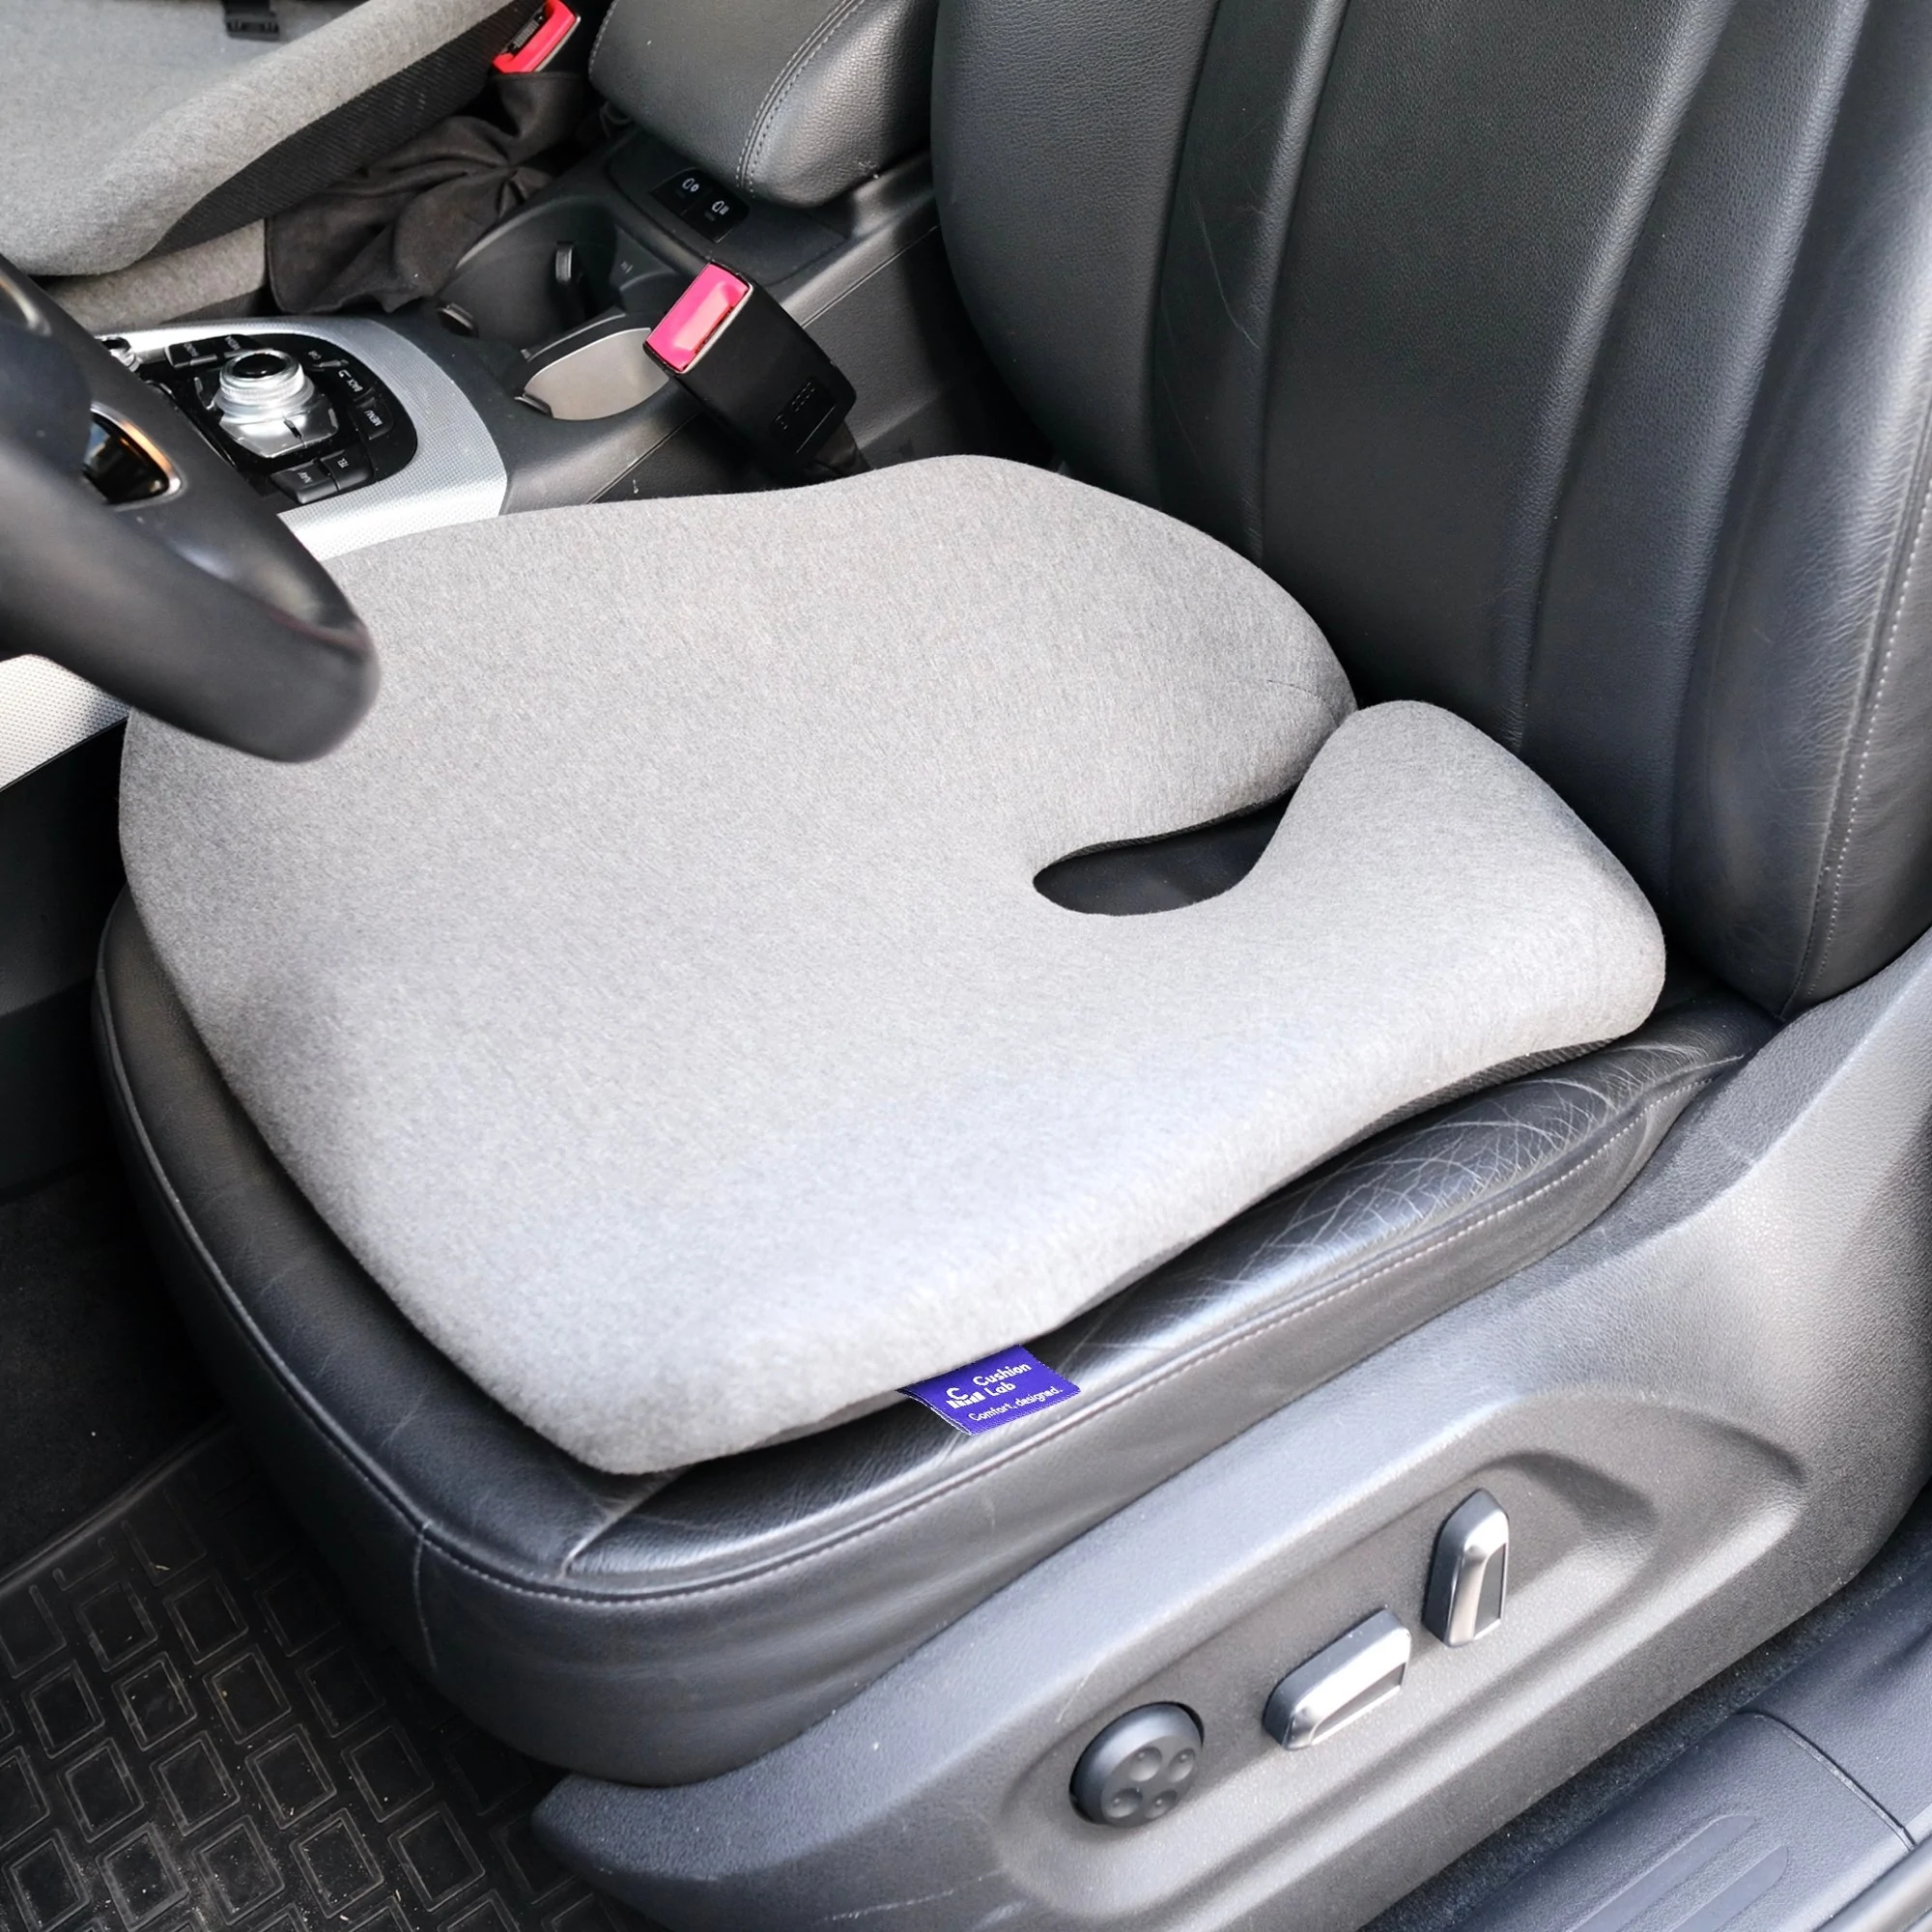 Trobo Seat Cushion, Car Pillow for Driving Seat to Improve